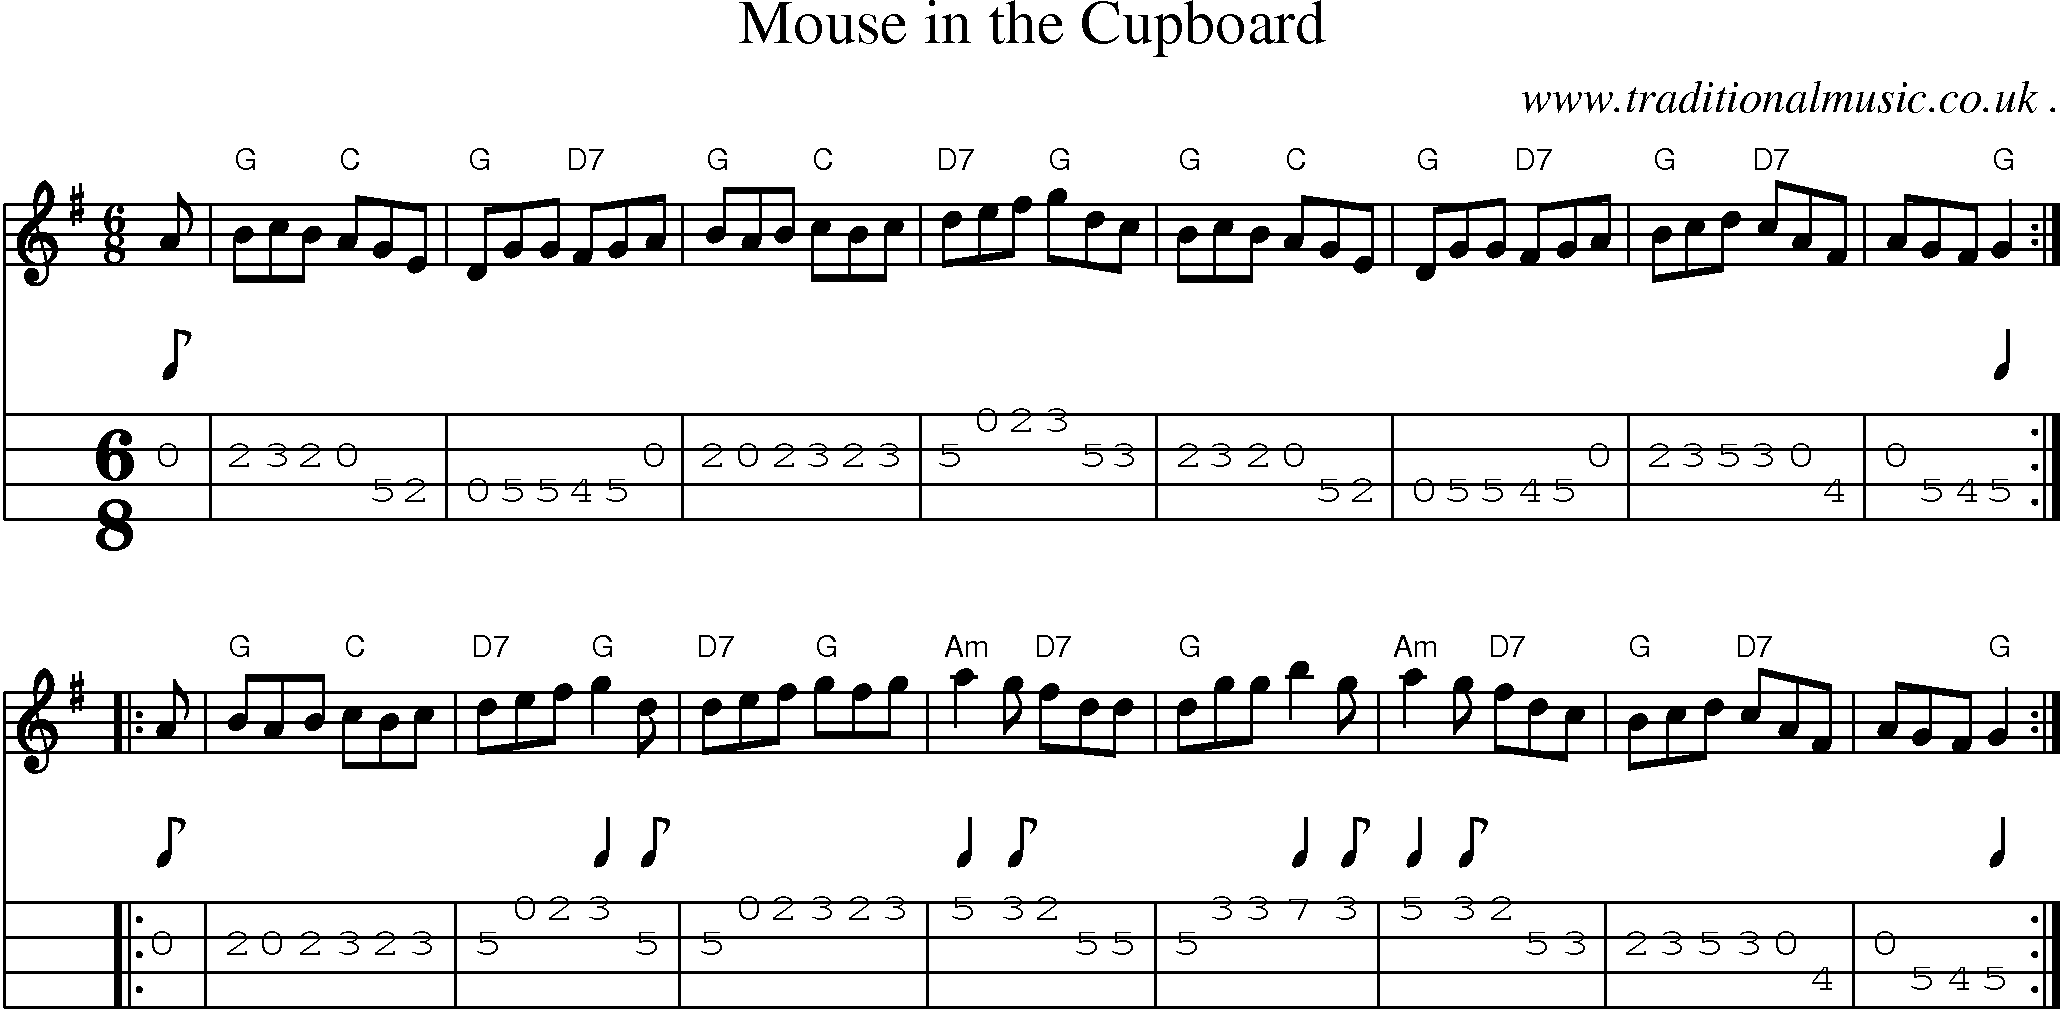 Sheet-music  score, Chords and Mandolin Tabs for Mouse In The Cupboard